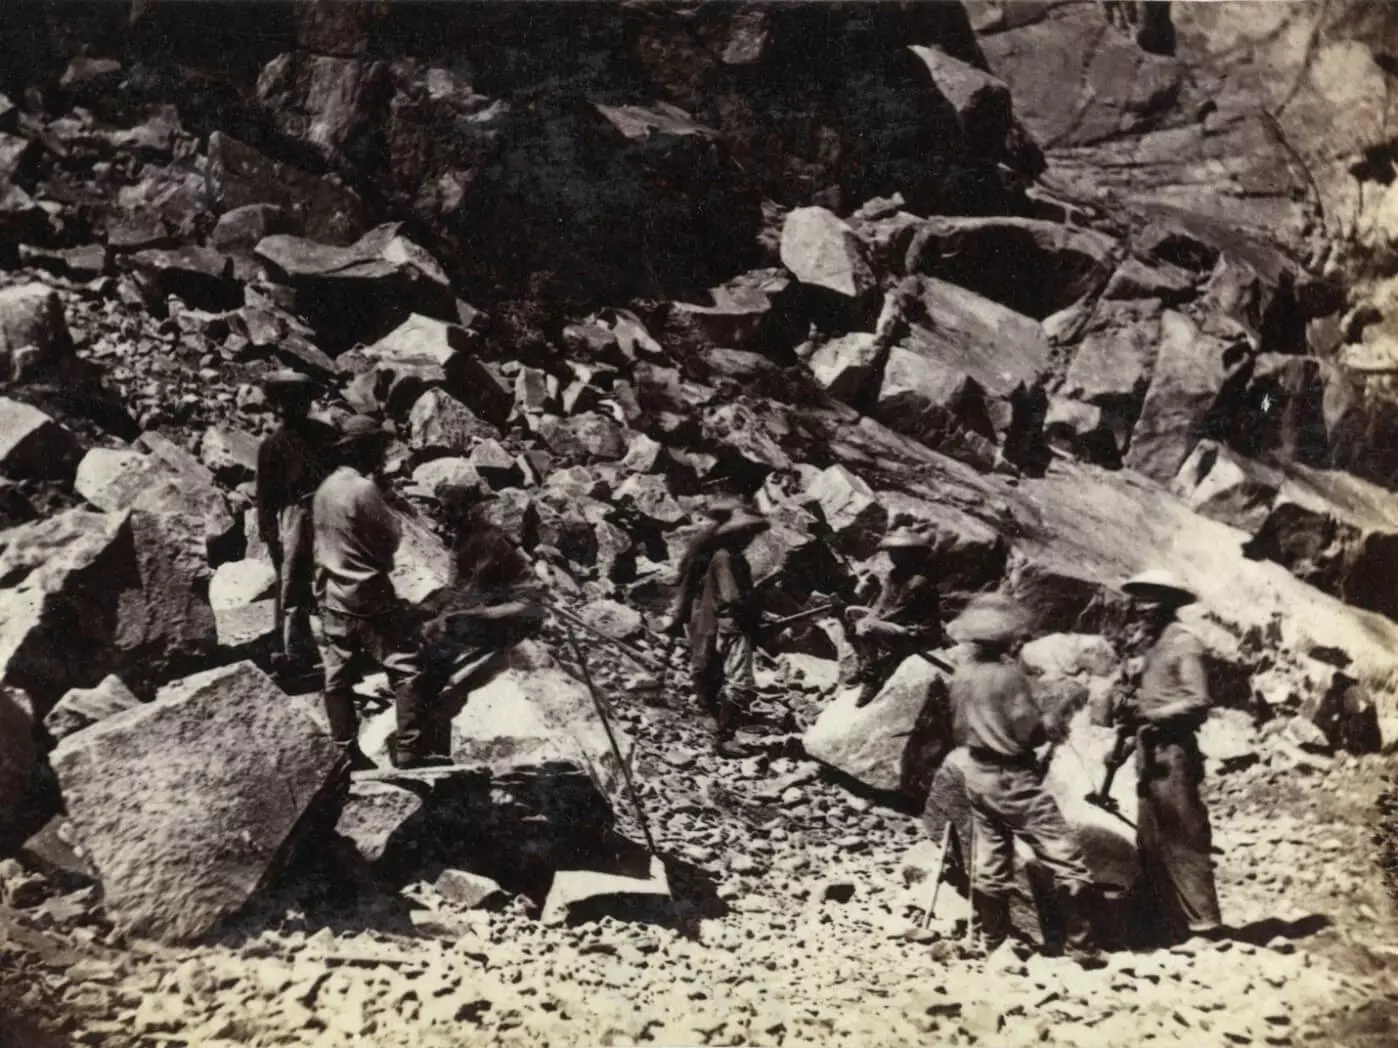 Chinese railroad workers in the Sierra Nevadas. 1862-1869. Alfred A. Hart Photographs, Department of Special Collections, Stanford University Libraries.